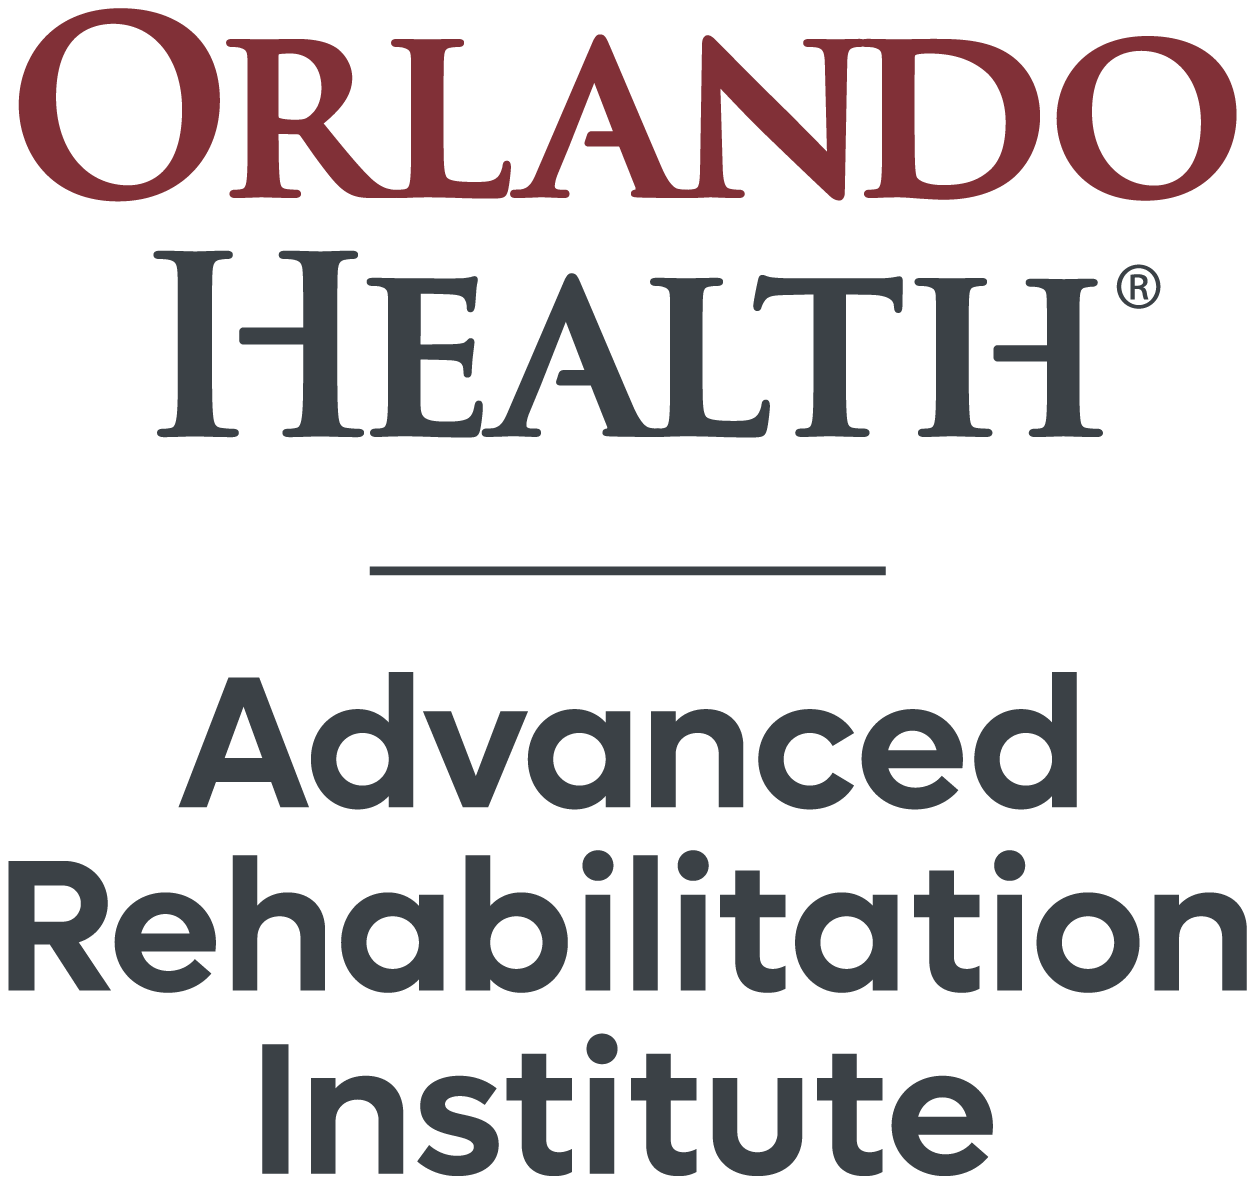 Annual Spinal Cord Injury Rehabilitation Reunion at the Orlando Regional Medical Center (ORMC)